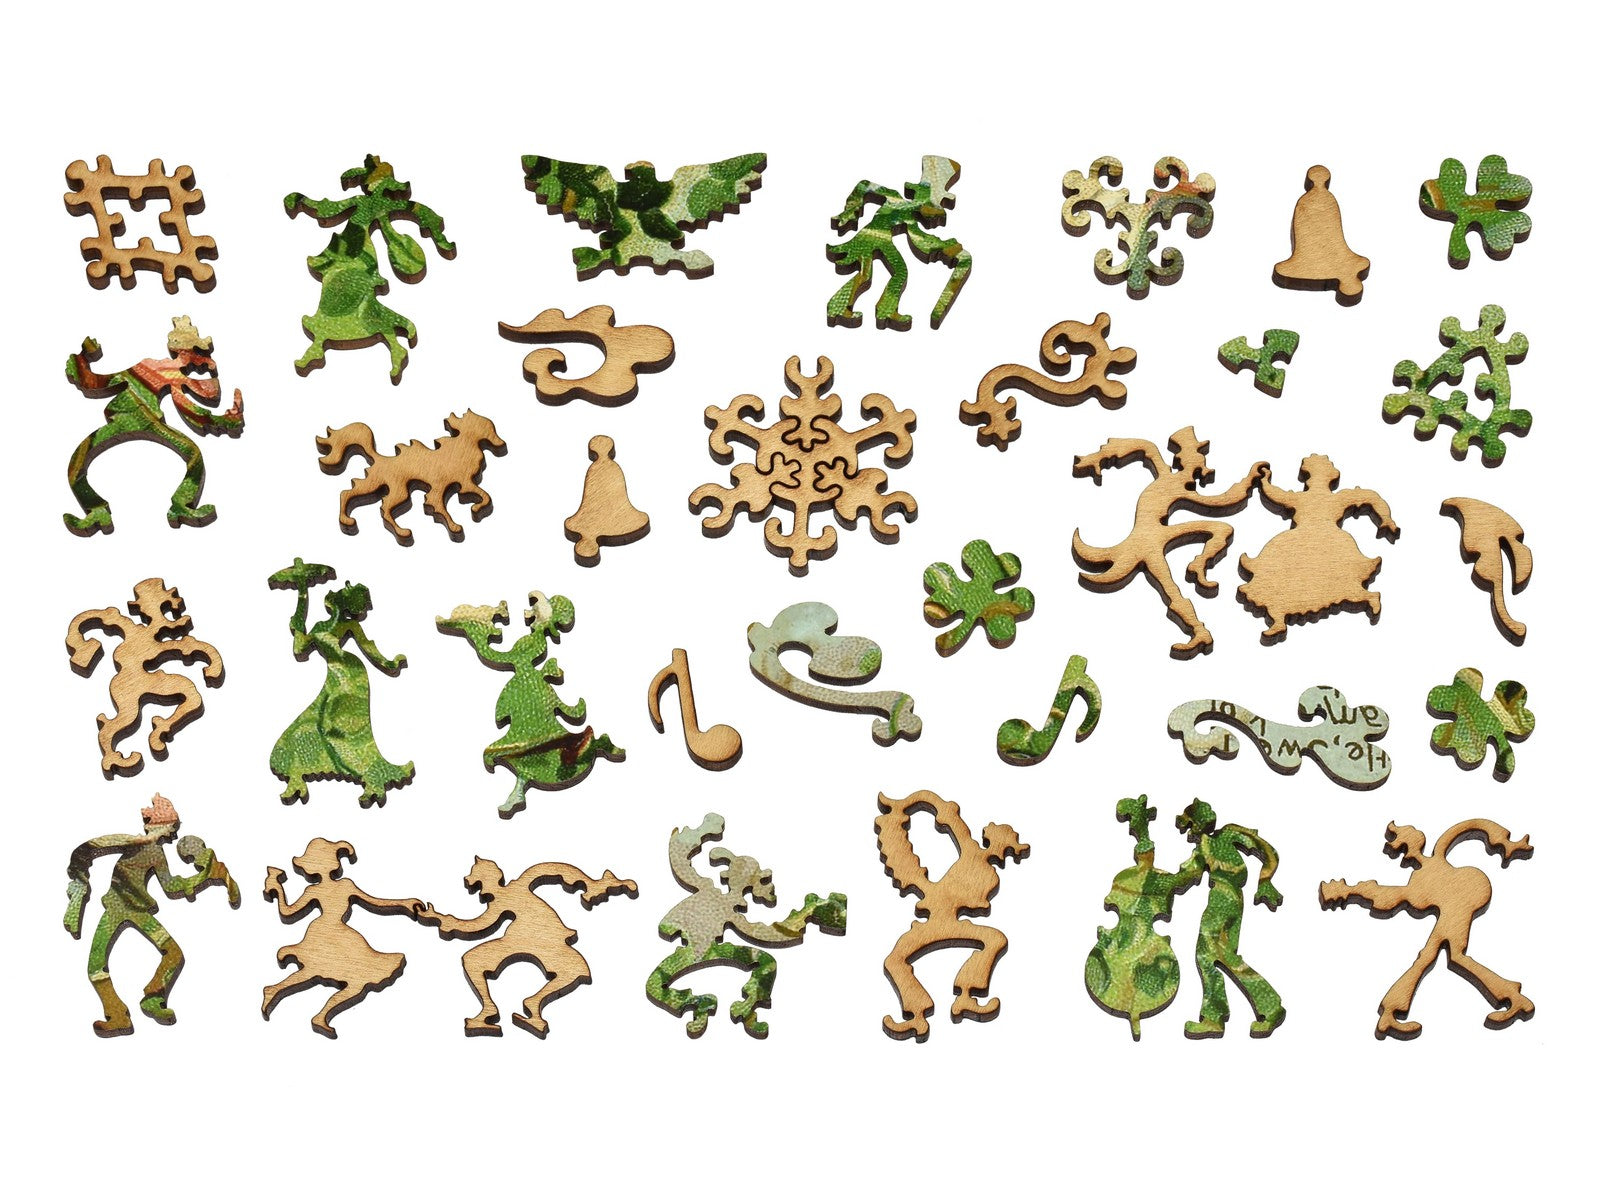 The whimsy pieces that can be found in the puzzle, Shamrock of Ireland.